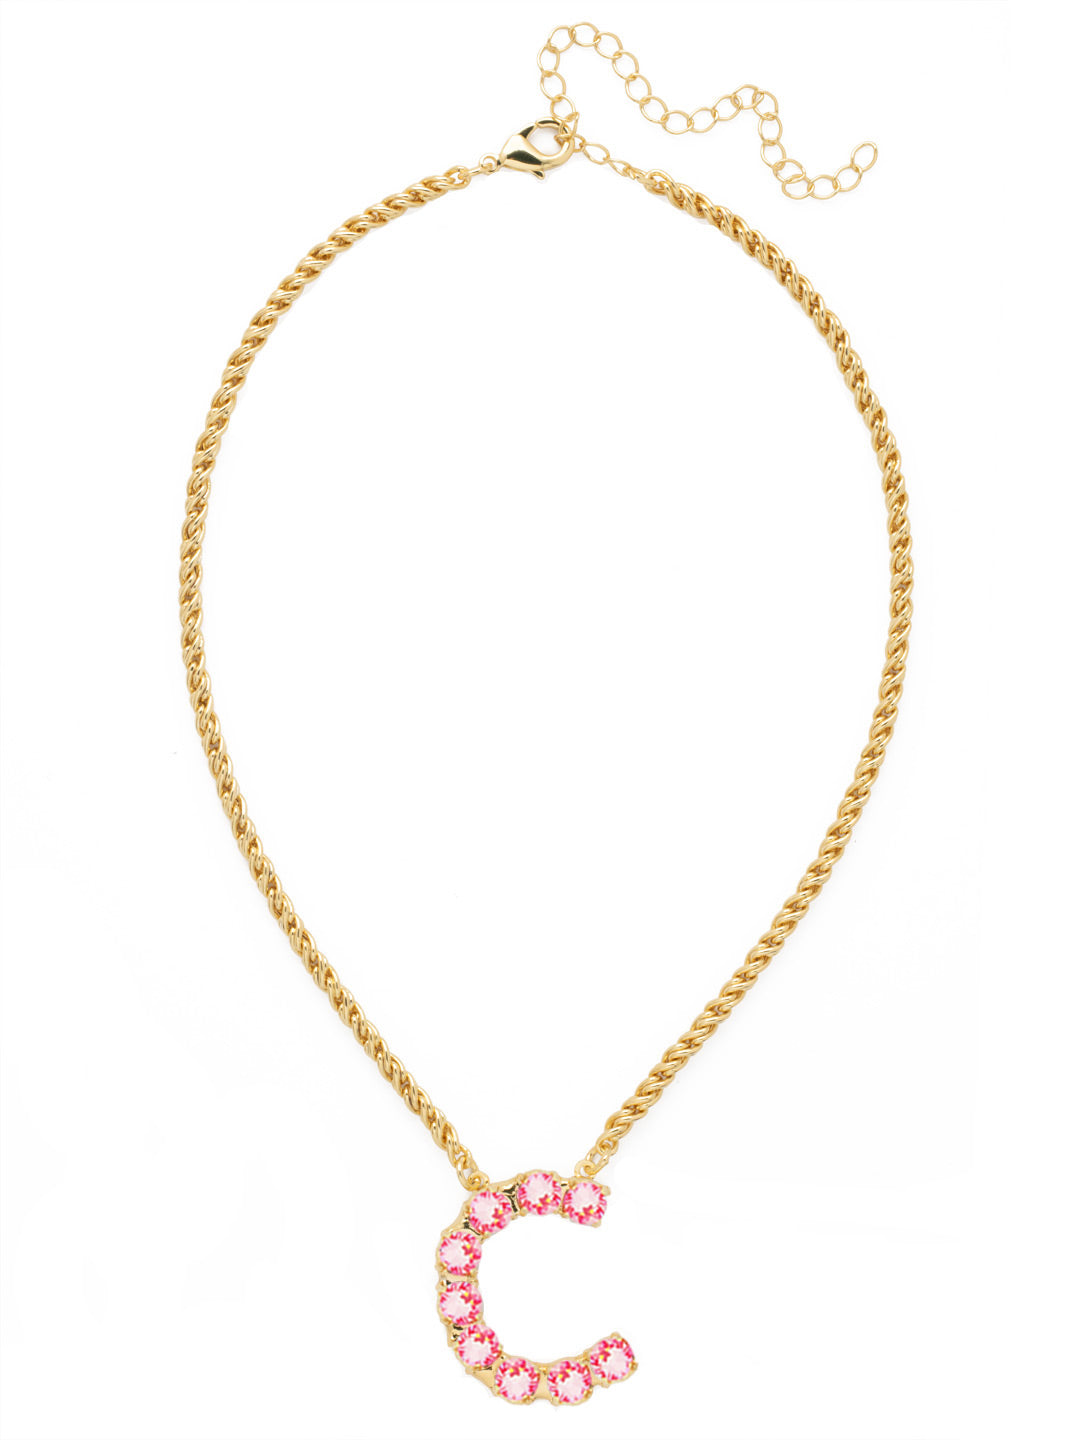 C Initial Rope Pendant Necklace - NFK22BGETP - <p>The Initial Rope Pendant Necklace features a crystal encrusted metal monogram pendant on an adjustable rope chain, secured with a lobster claw clasp. From Sorrelli's Electric Pink collection in our Bright Gold-tone finish.</p>